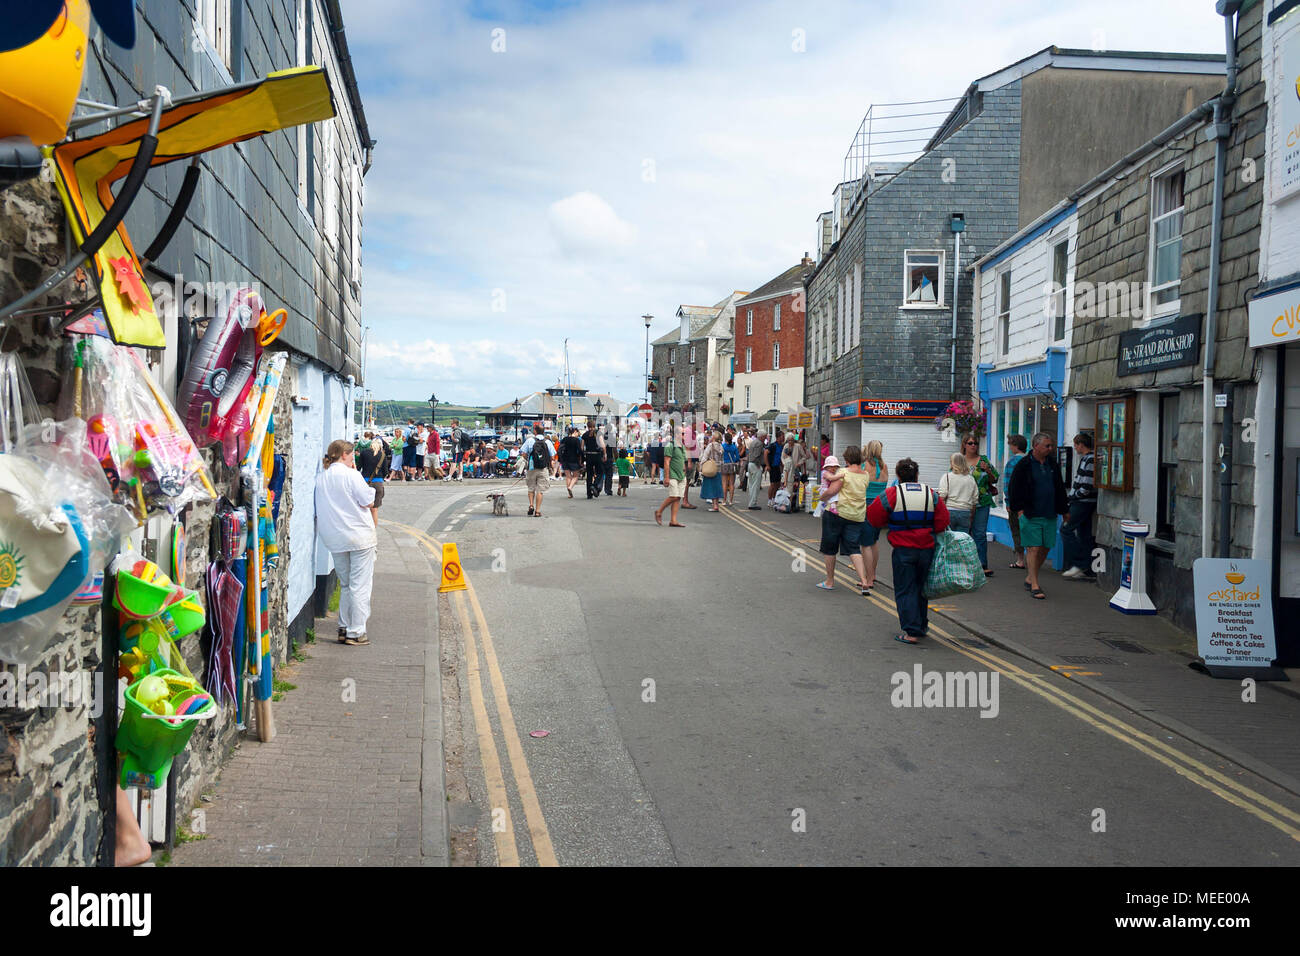 Padstow, Cornwall, UK - August 29, 2007: Looking along a busy street towards Padstow harbour with crowds of tourists on a summer day Stock Photo